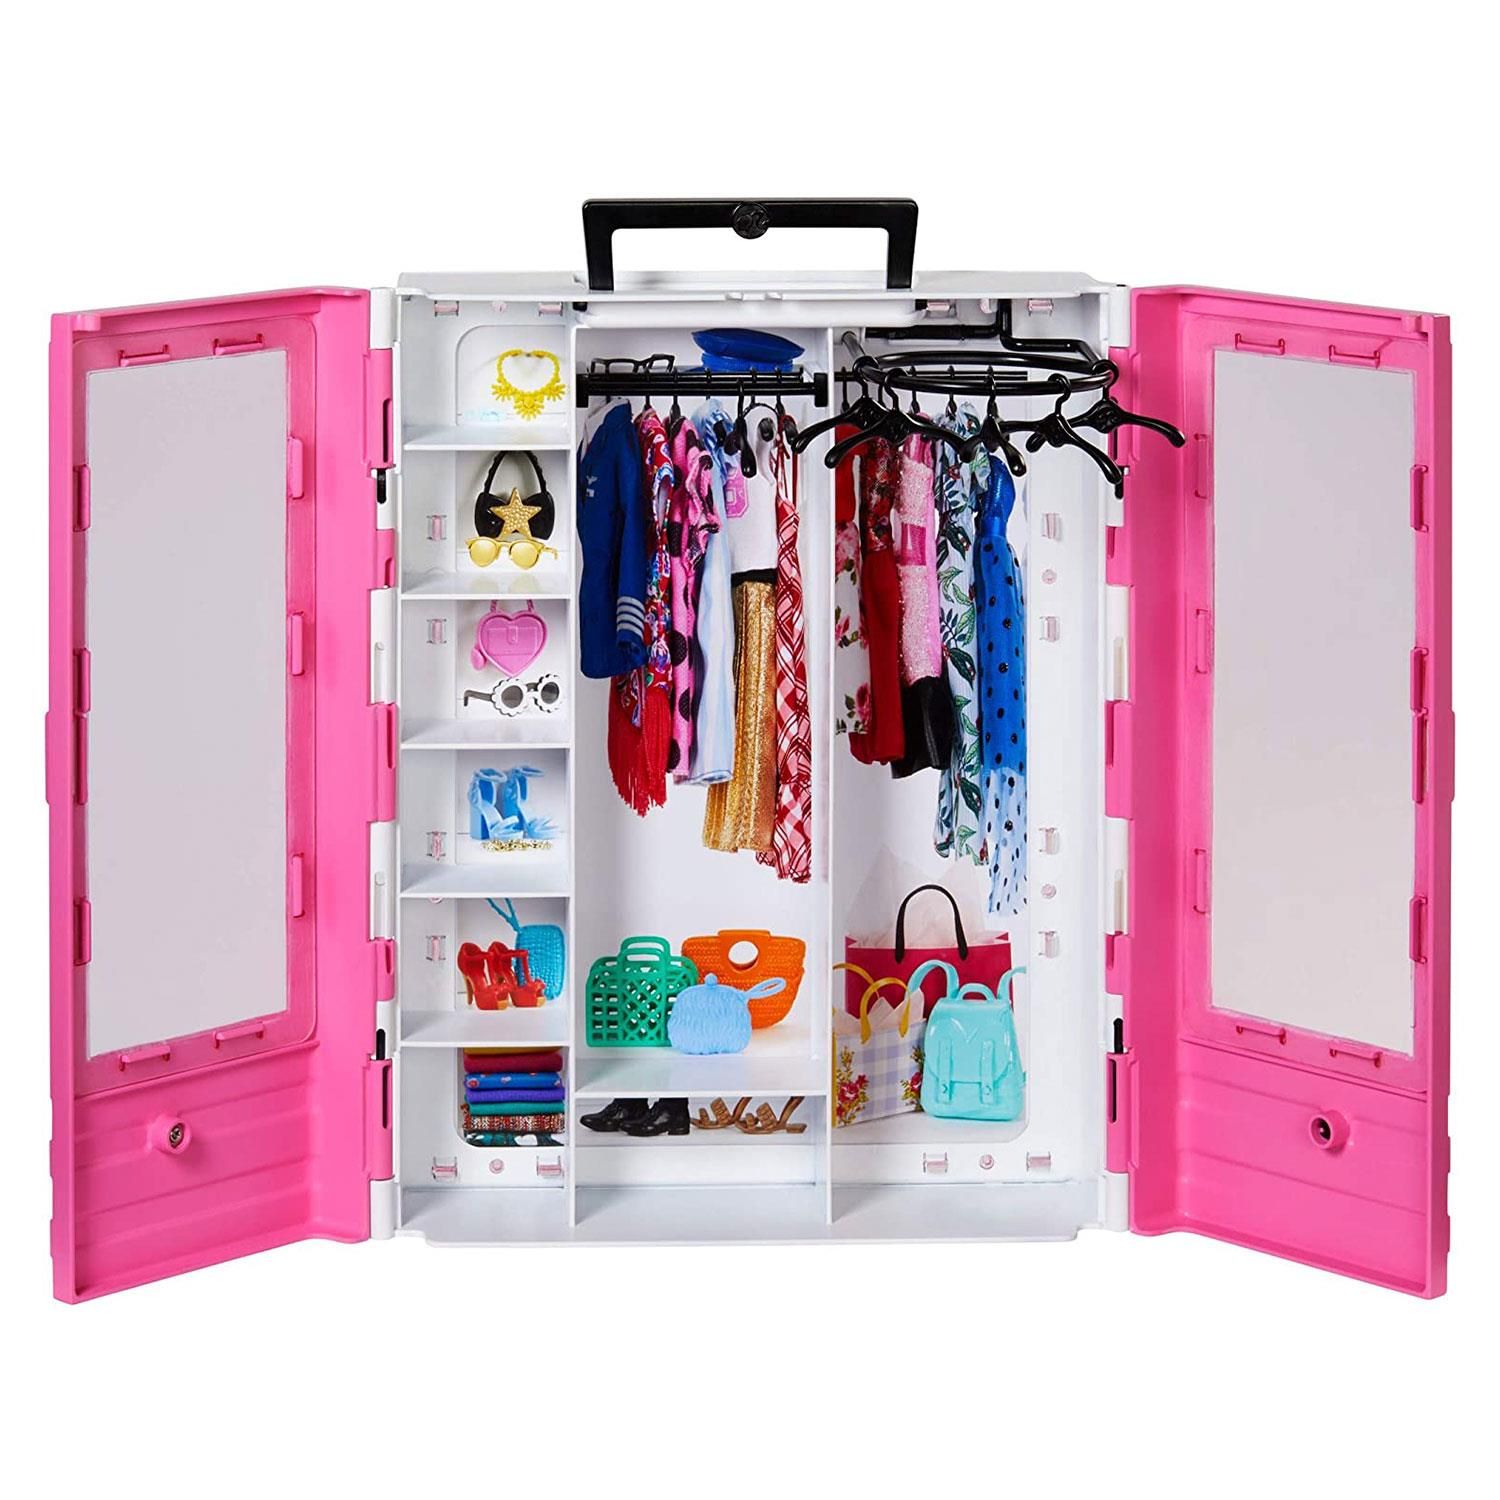 Pack a Barbie doll for a world of possibility! The Barbie Ultimate Closet is designed for portability with a carrying handle. Decorated with Barbie signature style, the pink closet features translucent doors for a peek into the wardrobe. Six included hangars help keep fashions fashionable, and lots of shelf space is perfect for the amazing accessories. A fold-out rack helps role-play dress-up fun. The easy carrying handle keeps the portable closet ready to travel, anywhere, for any occasion, because when a girl plays with Barbie, she imagines everything she can become! Includes portable closet and six hangers; doll and fashions not included. Colours and decorations may vary.